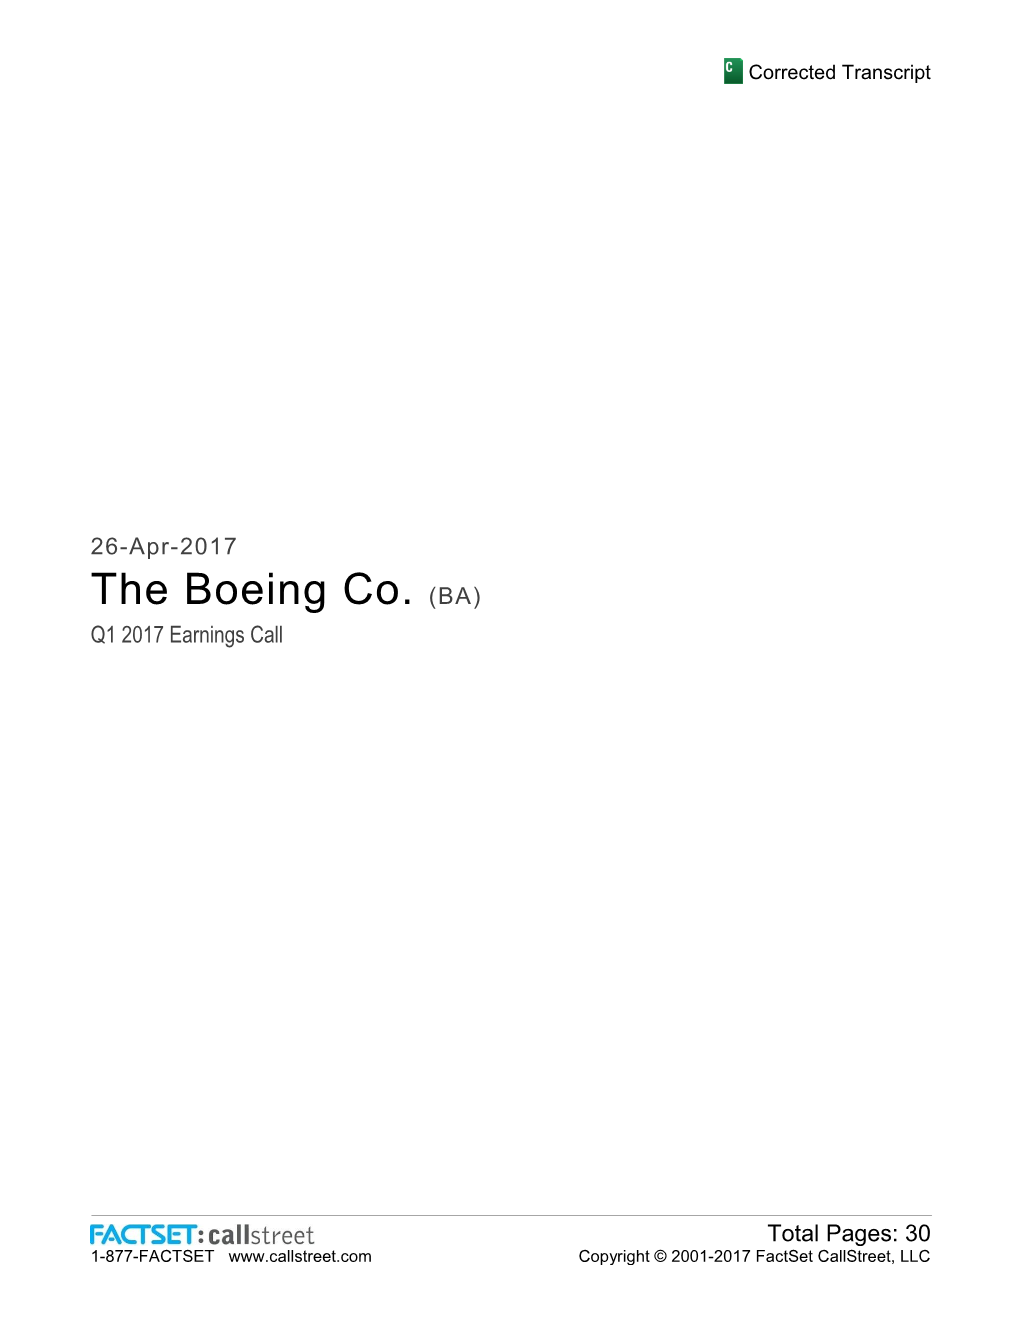 The Boeing Co. (BA) Q1 2017 Earnings Call